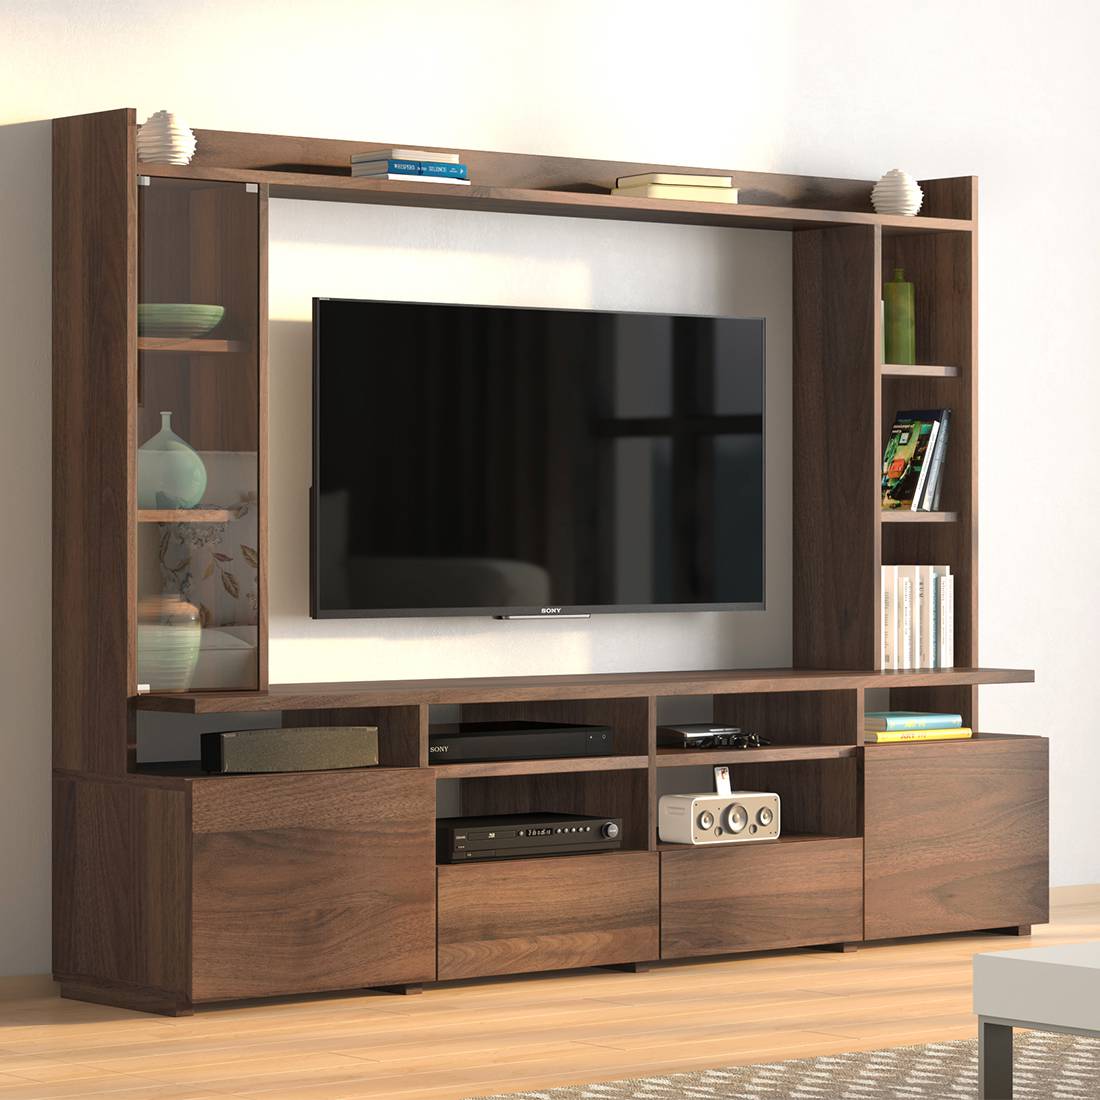 TV Units For Home 2021 Designs Urban Ladder